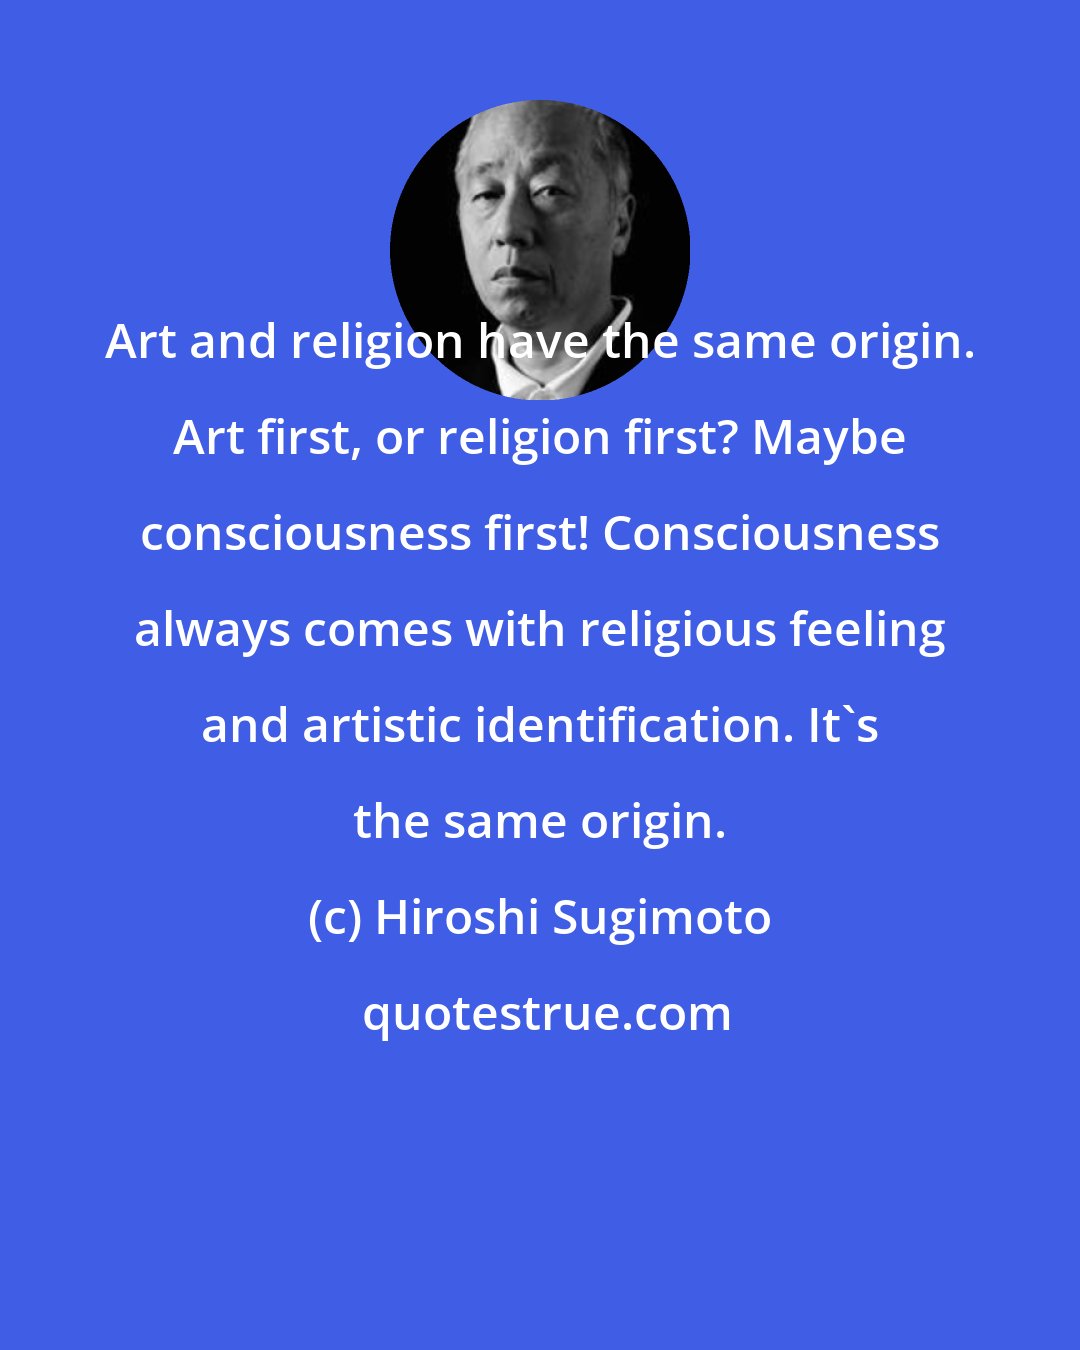 Hiroshi Sugimoto: Art and religion have the same origin. Art first, or religion first? Maybe consciousness first! Consciousness always comes with religious feeling and artistic identification. It's the same origin.